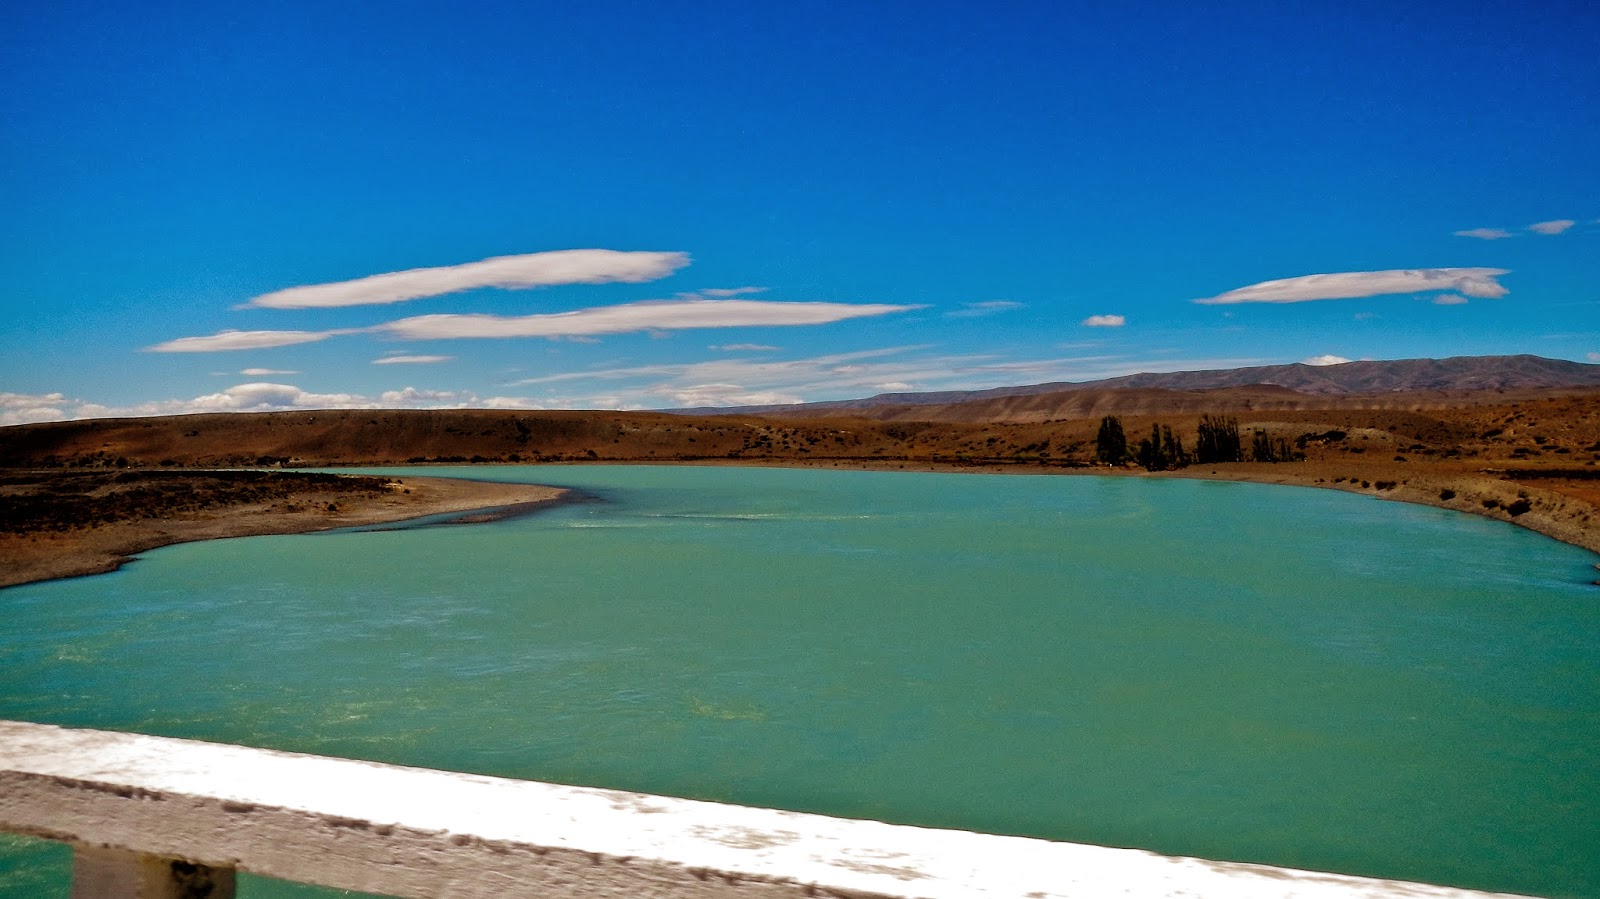 The Life and Travels of The Ellingers: Our Honeymoon - Day 4 - Calafate ...